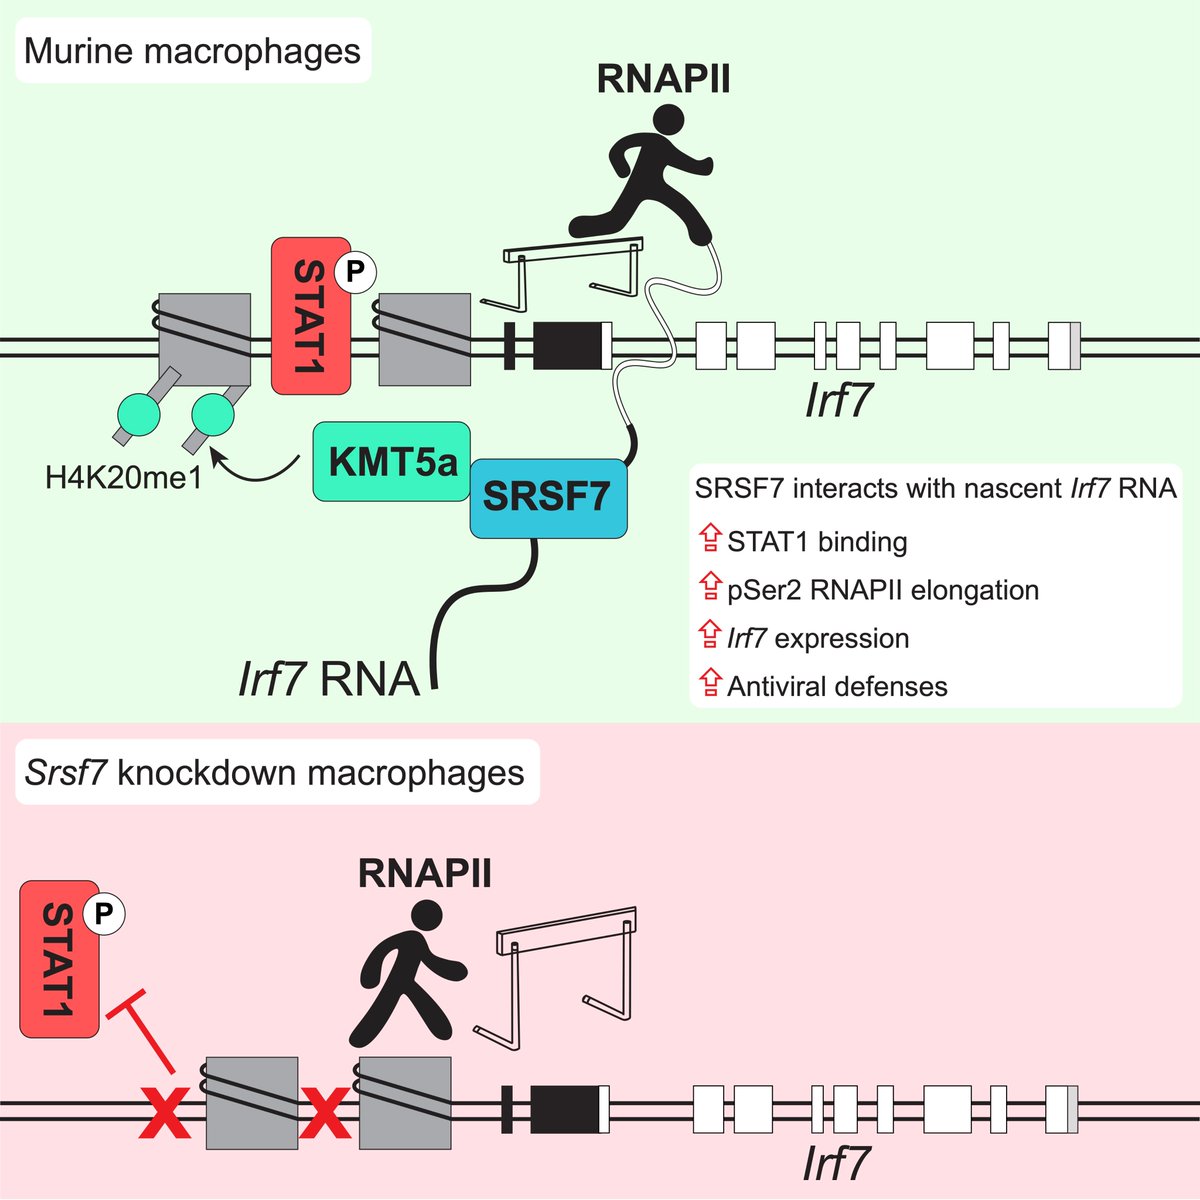 Another PW lab paper for you! Here, in @CellReports we report that SRSF7 is unique amongst SR proteins in its ability to activate antiviral immunity. It does so by directly activating transcription of IRF7, a master regulator of the type I IFN response. cell.com/cell-reports/f…